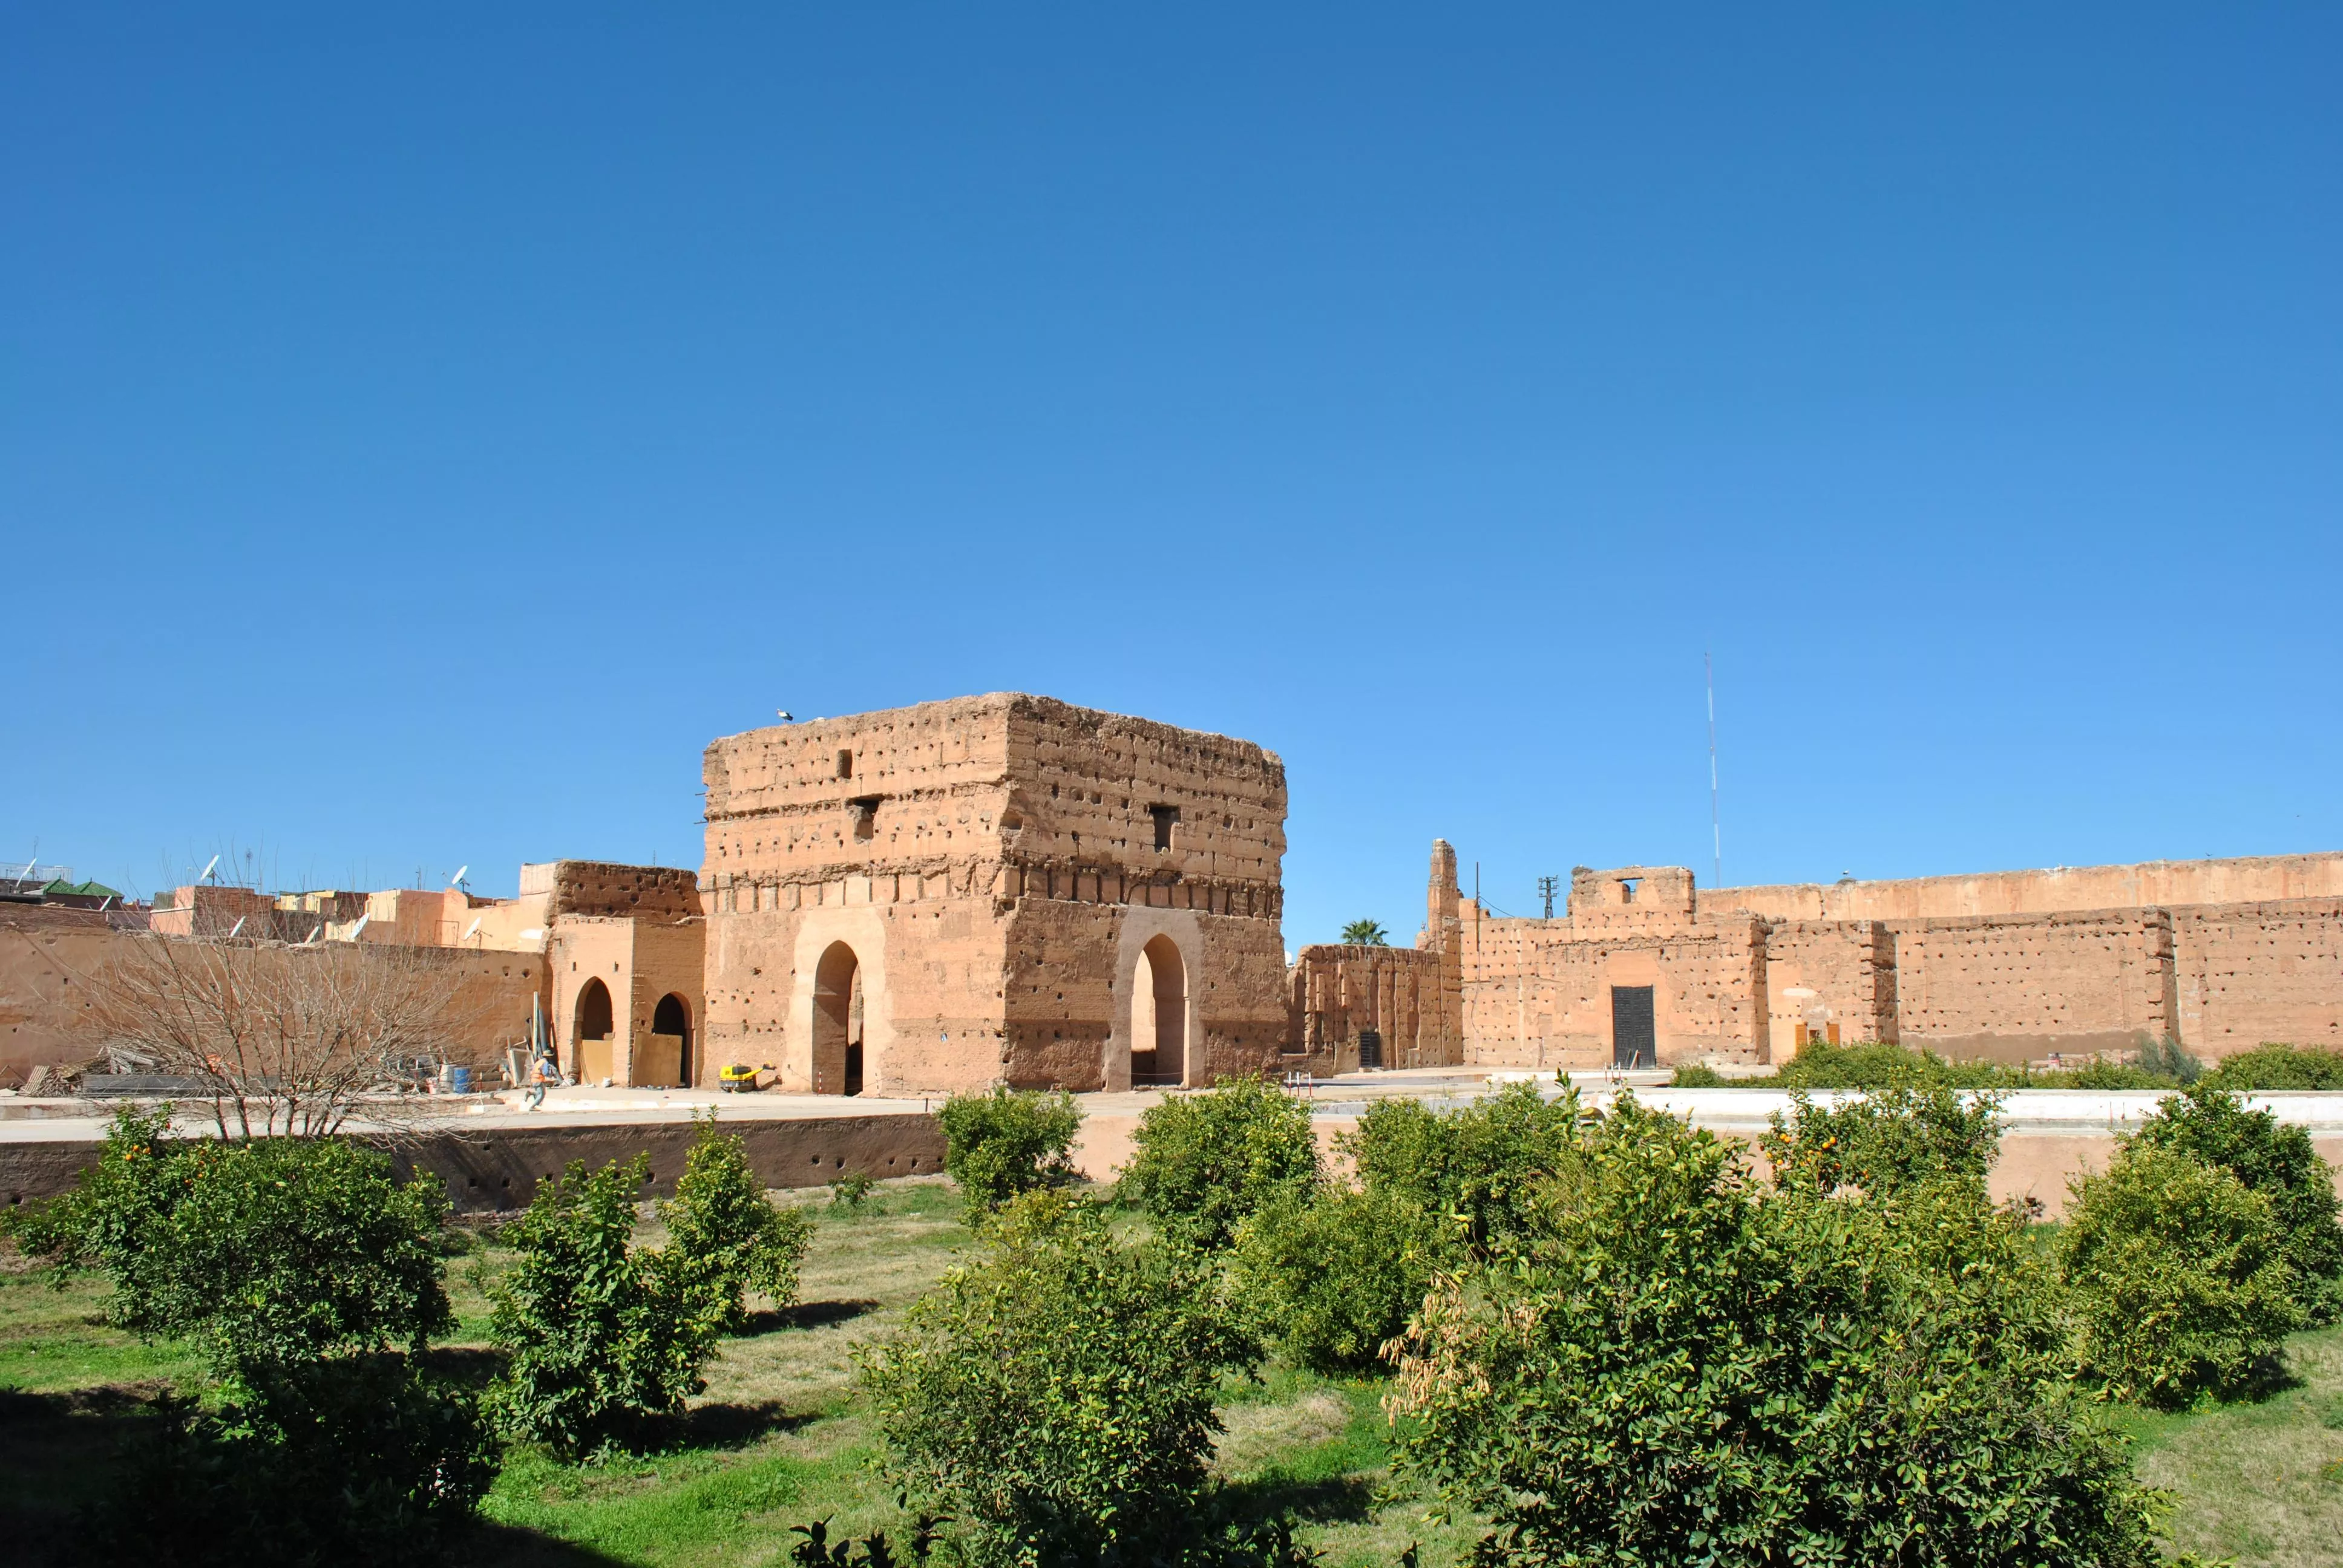 El Badi in Morocco, Africa | Architecture - Rated 3.5